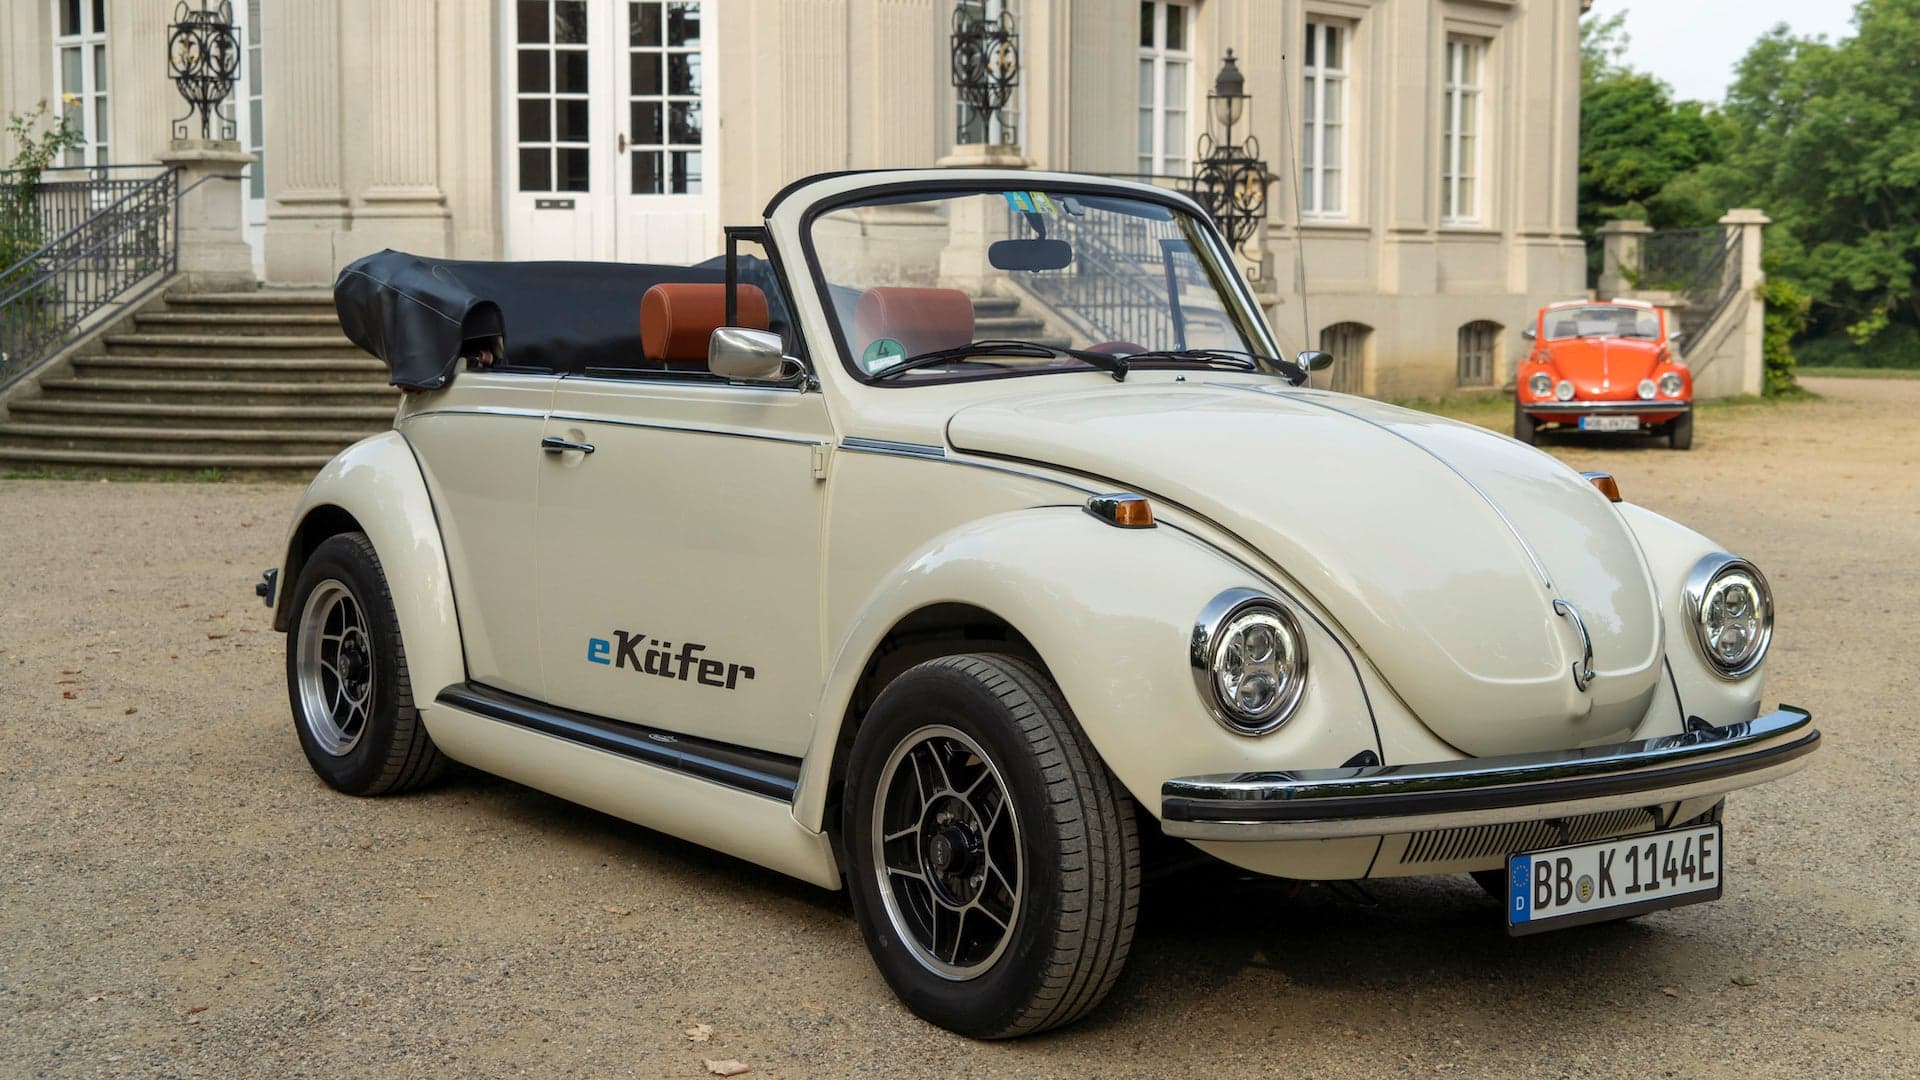 Volkswagen Commissioned These Adorable Electric Vintage Beetles Dubbed E-Kafers